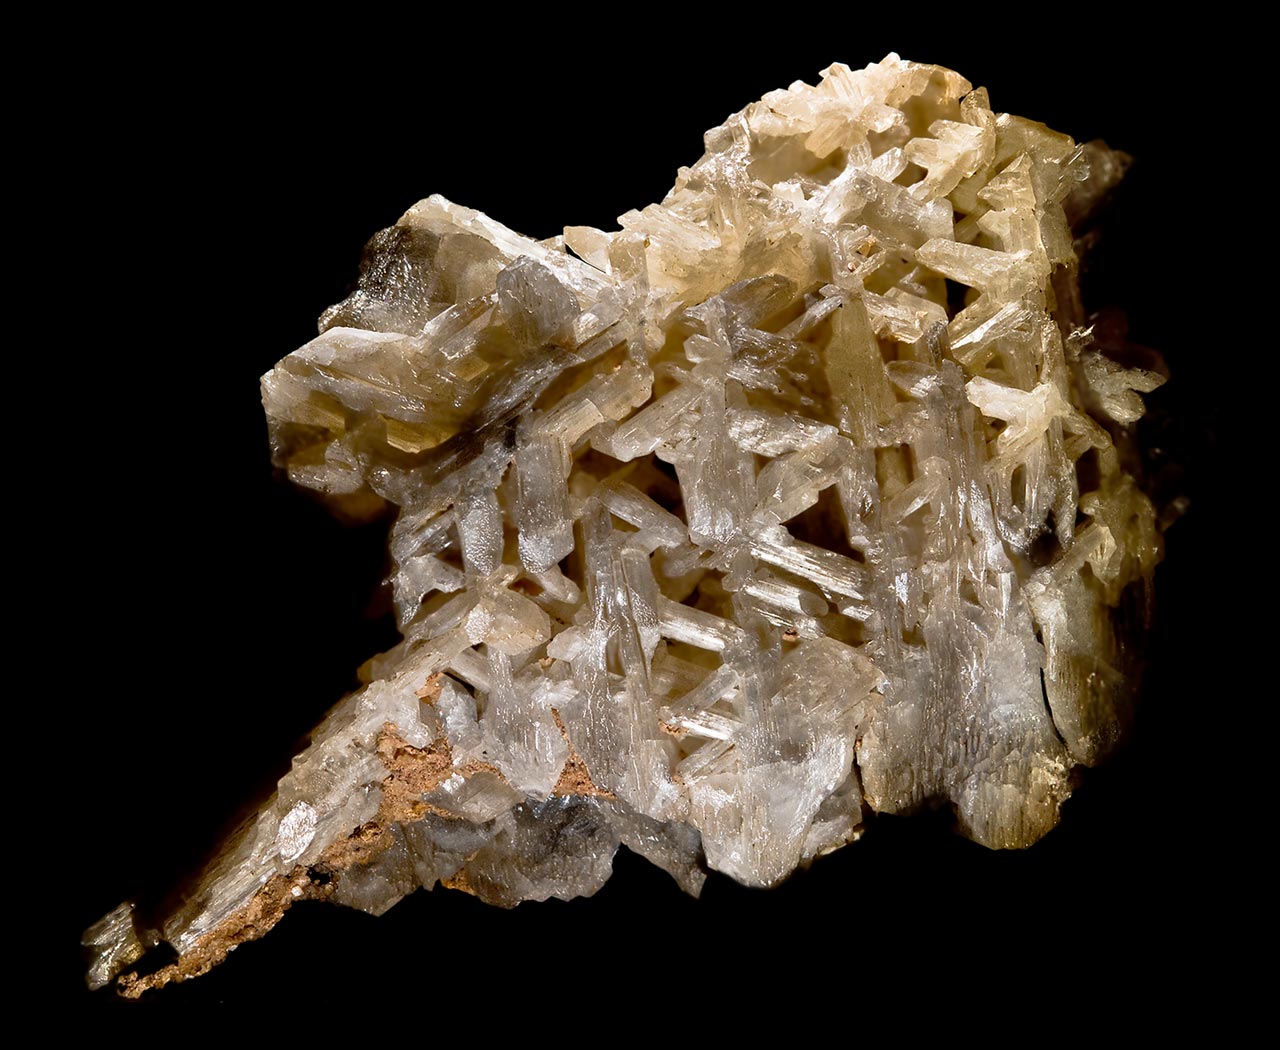 Snowflake shaped aggregate of cerussite crystals from Tsumeb, Namibia